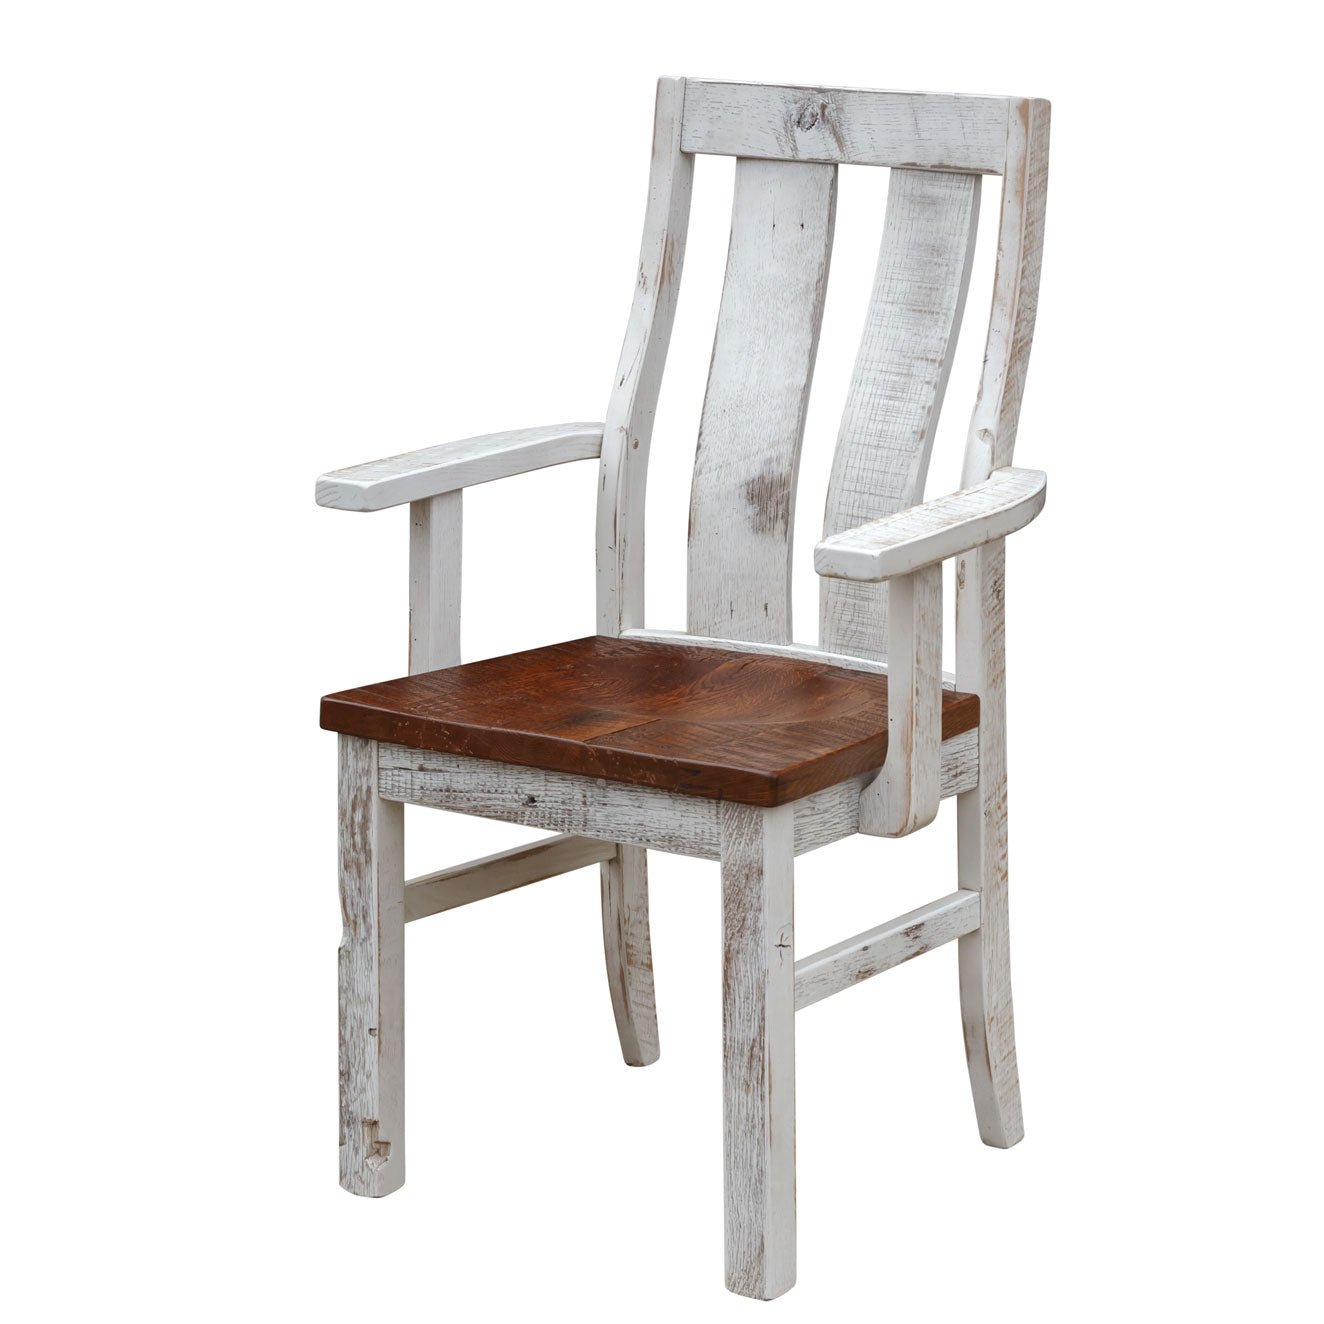 Silverton Barnwood Chair - snyders.furniture